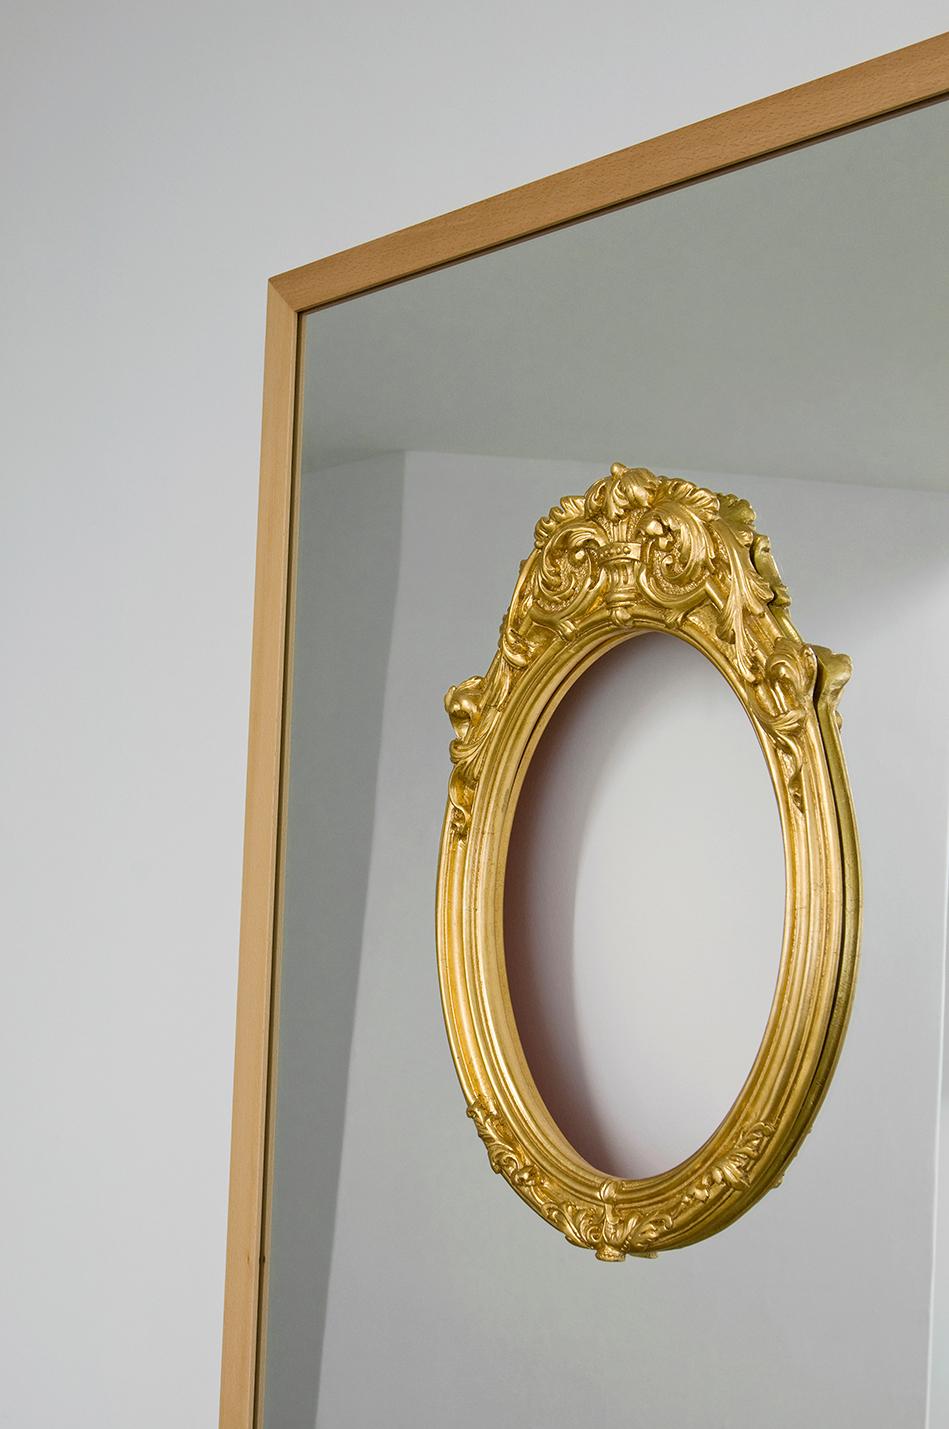 Modern Ron Gilad for Dilmos Limited Edition Rectangular Mirror Golden Leaf In New Condition For Sale In Milan, IT